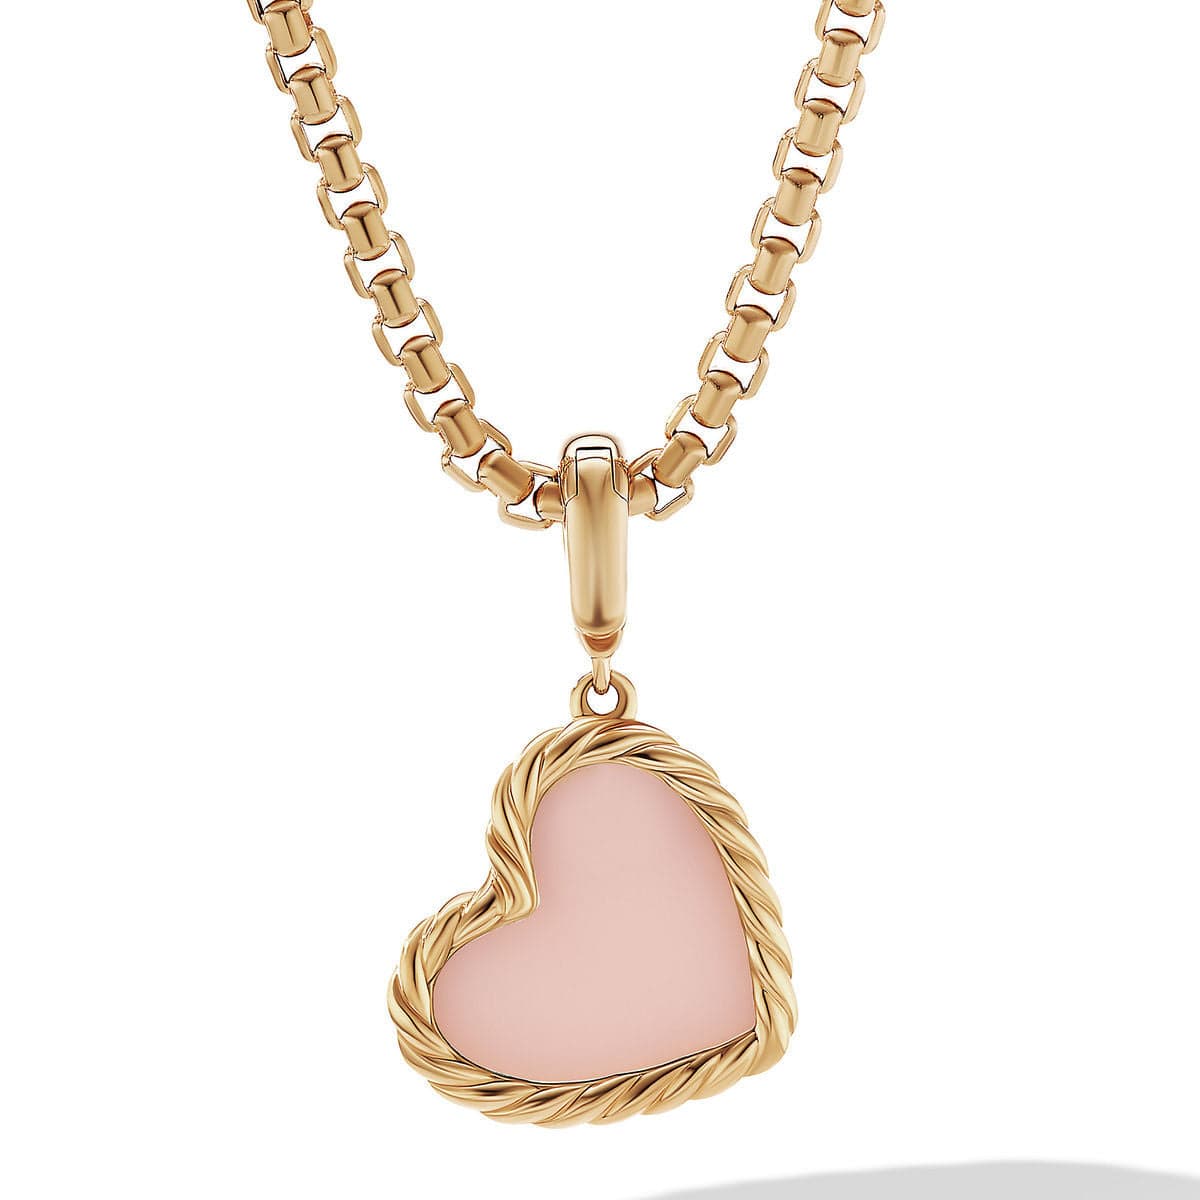 DY Elements ®Heart Amulet in 18K Yellow Gold with Pink Opal, Yellow Gold, Long's Jewelers